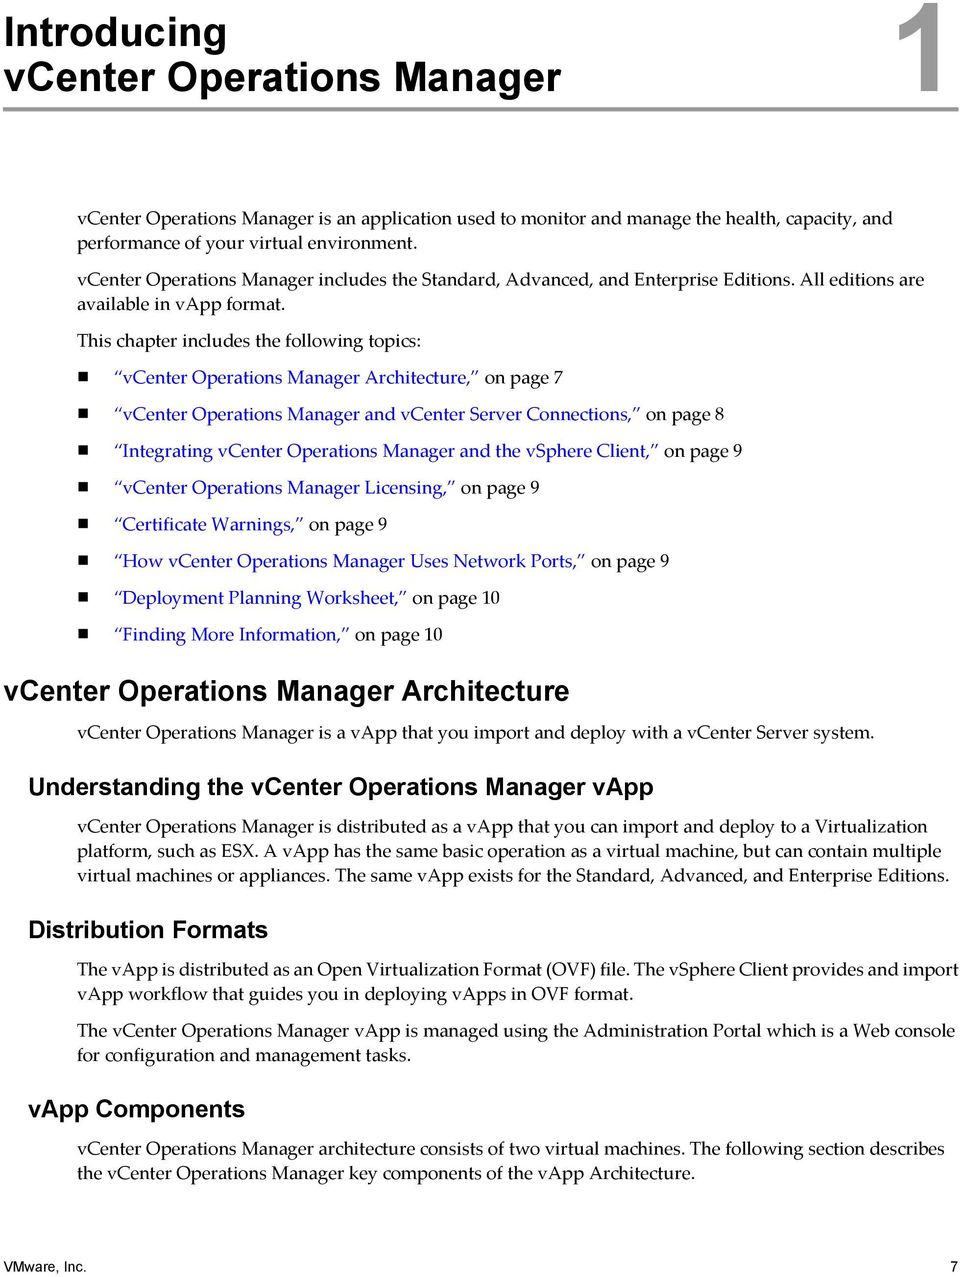 This chapter includes the following topics: vcenter Operations Manager Architecture, on page 7 vcenter Operations Manager and vcenter Server Connections, on page 8 Integrating vcenter Operations